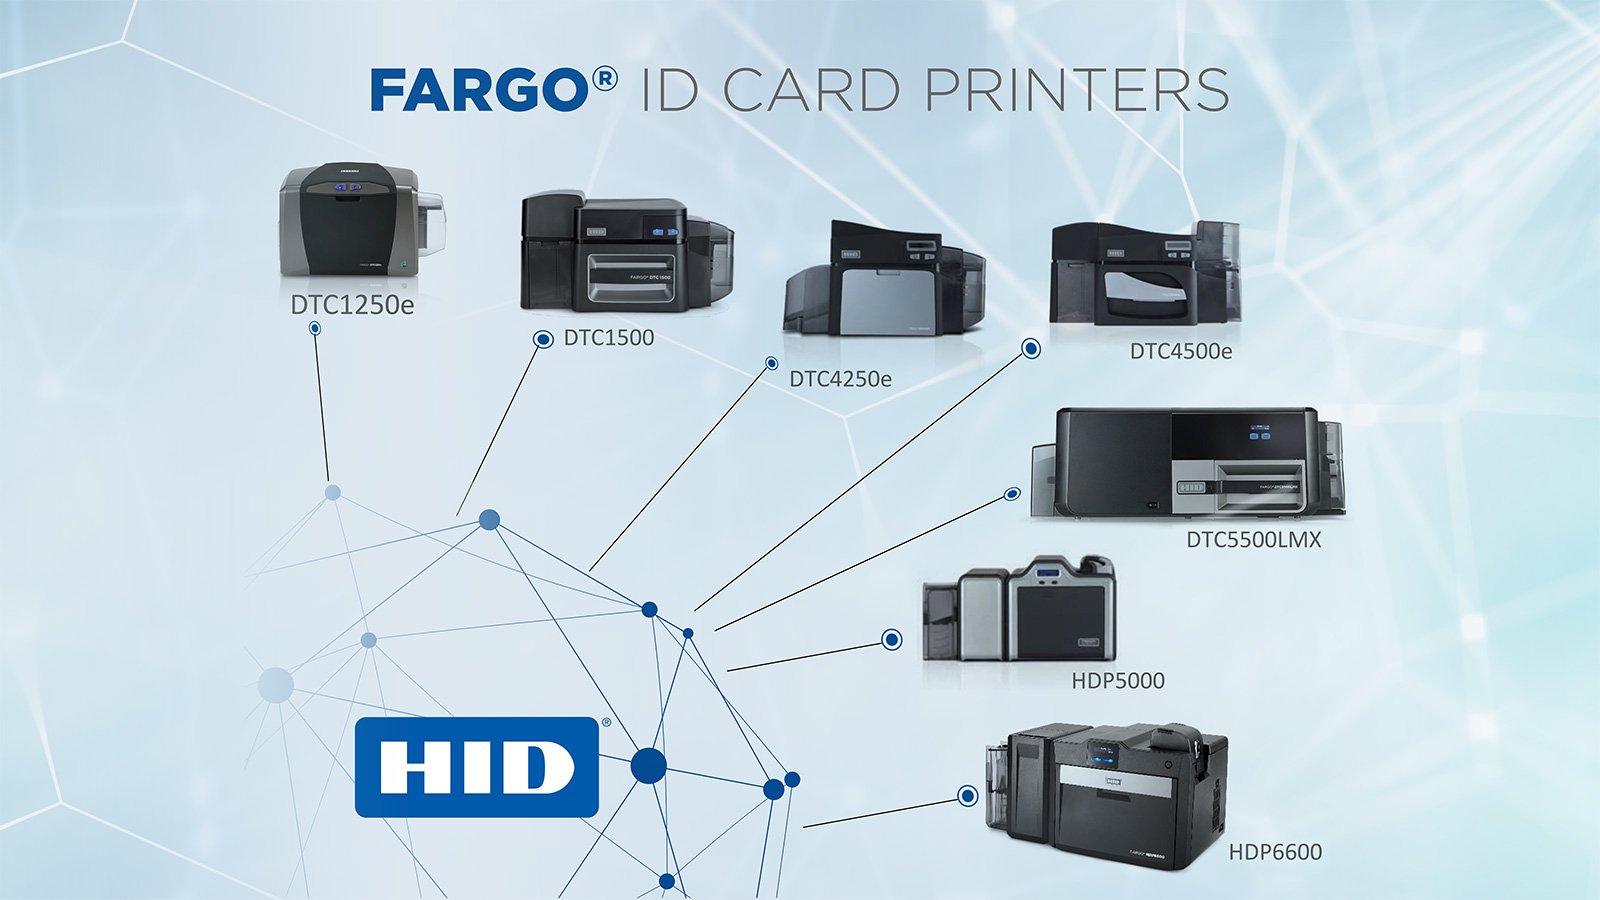 Overview_of_Fargo_ID_Card_Printer_Systems-1600x900